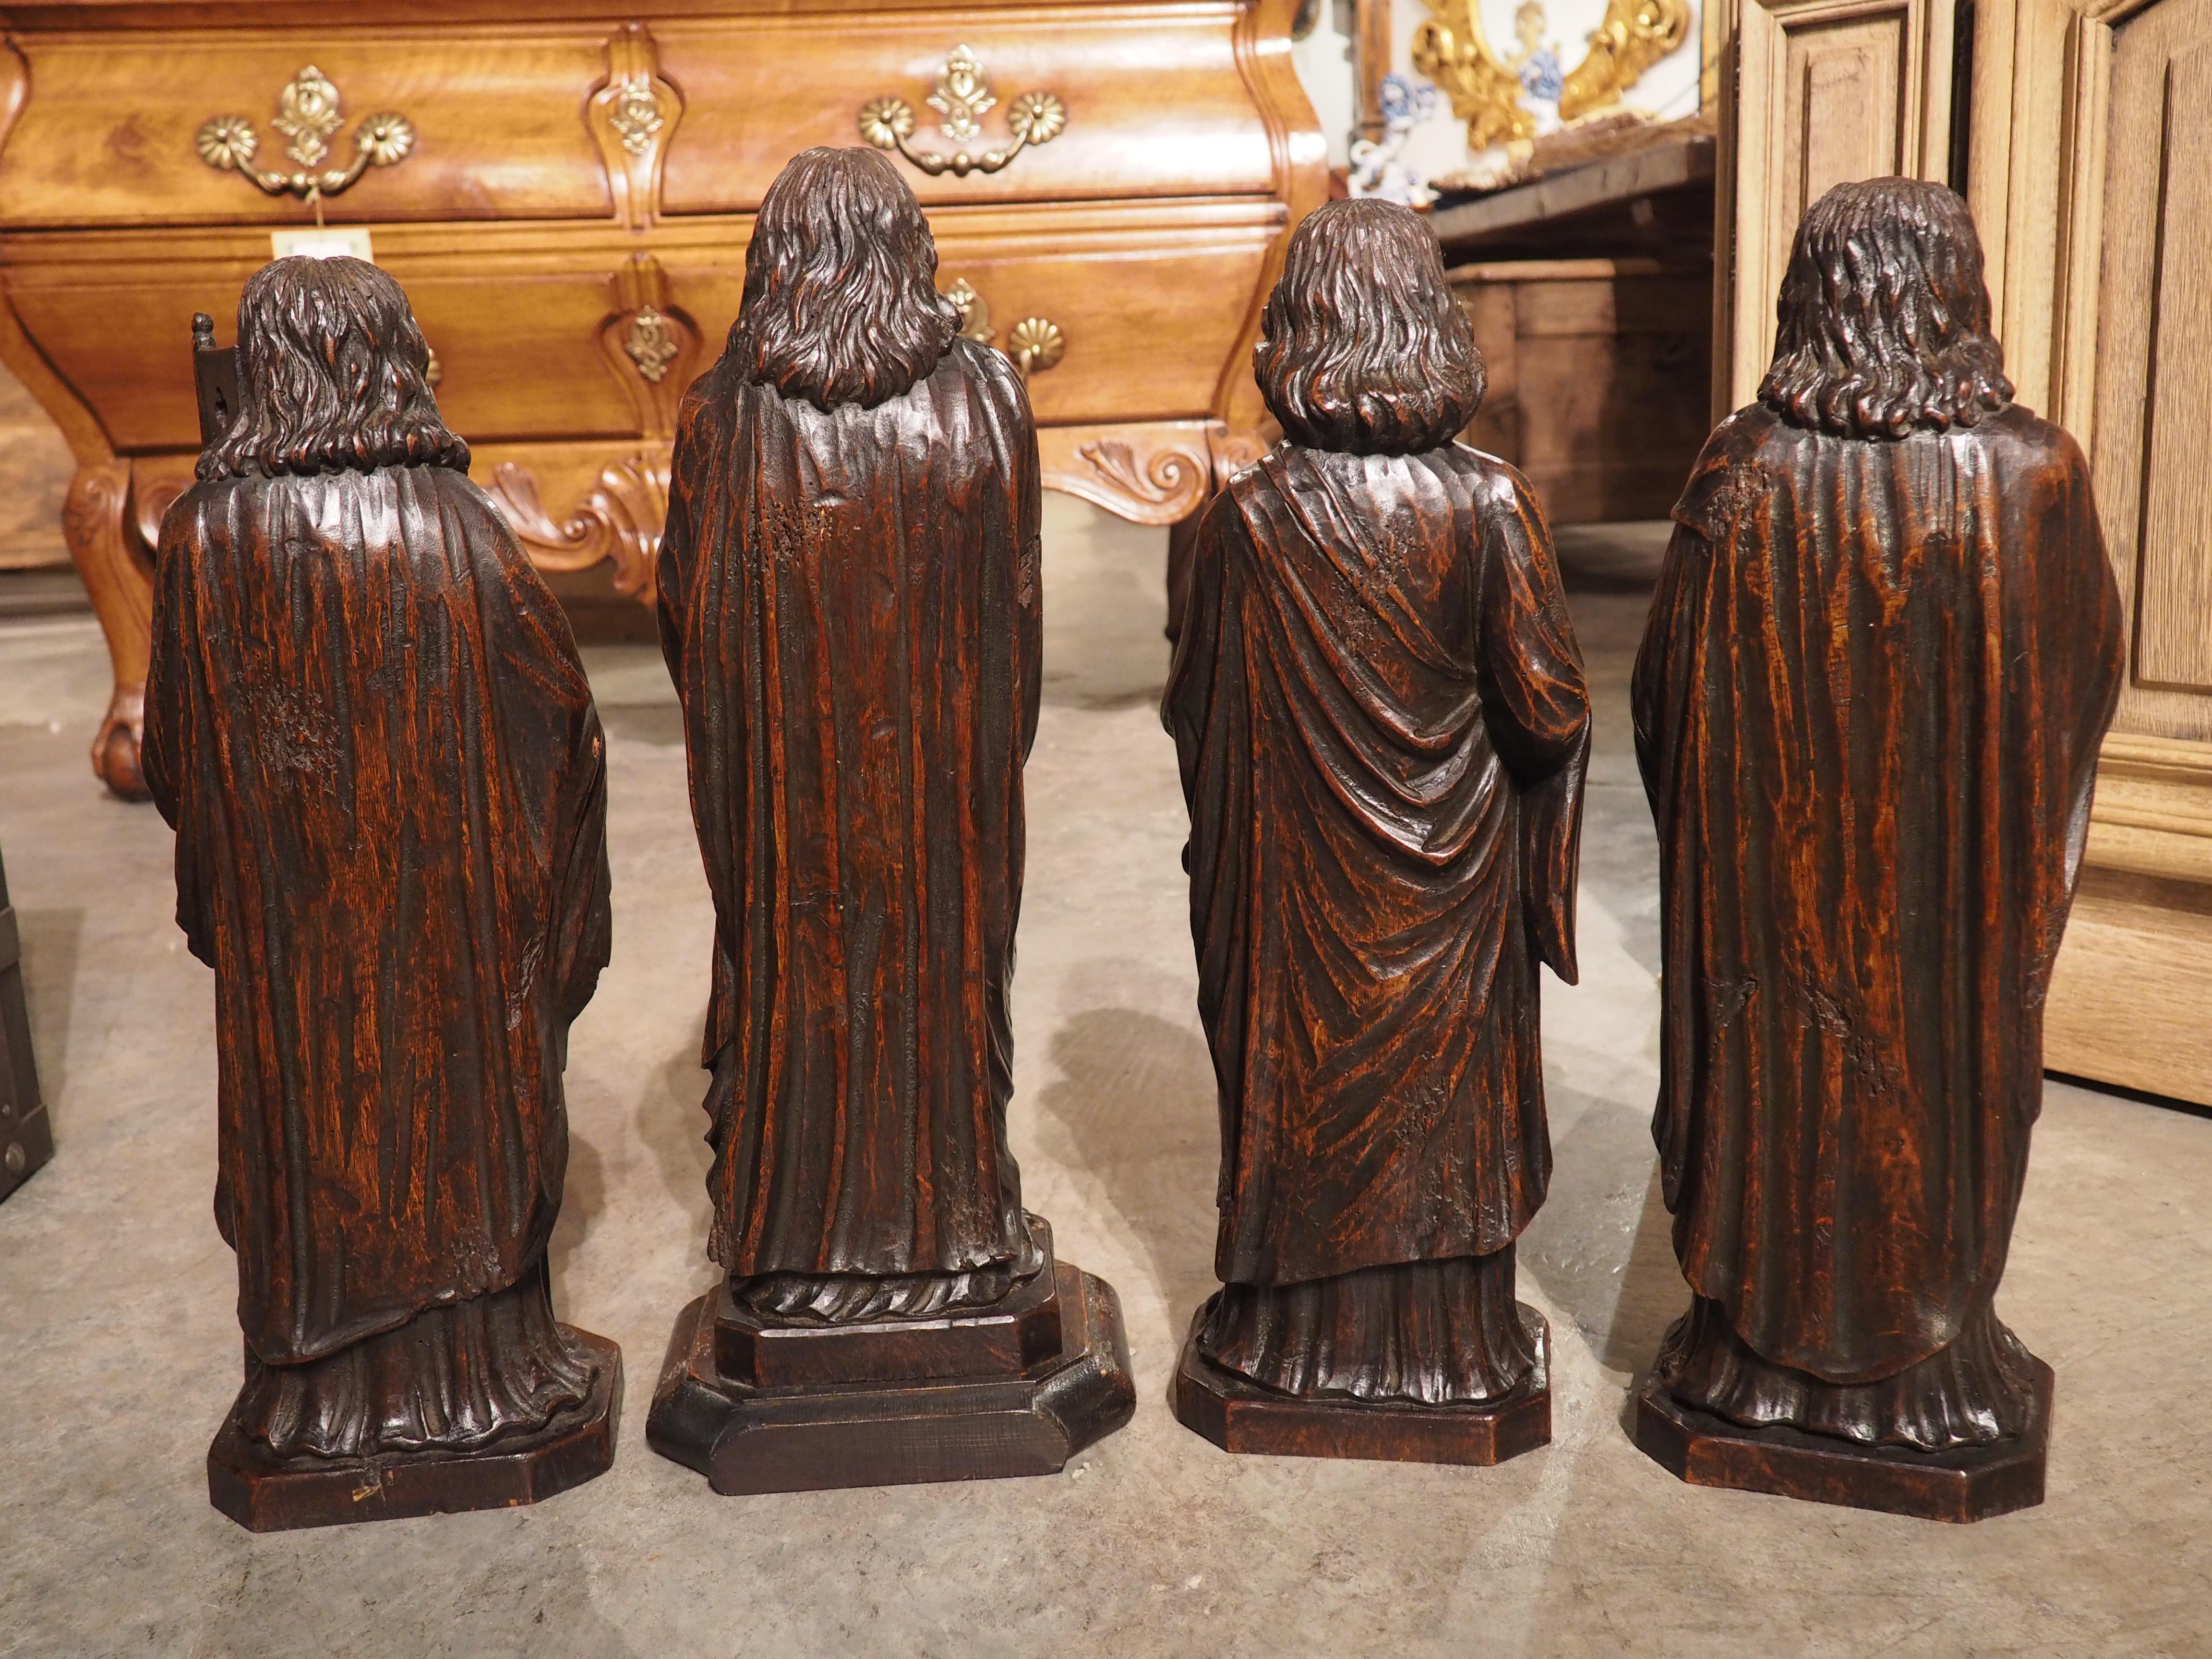 Circa 1800 Carved Oak Sculptures of the Apostles, James, John, Peter, and Paul For Sale 7